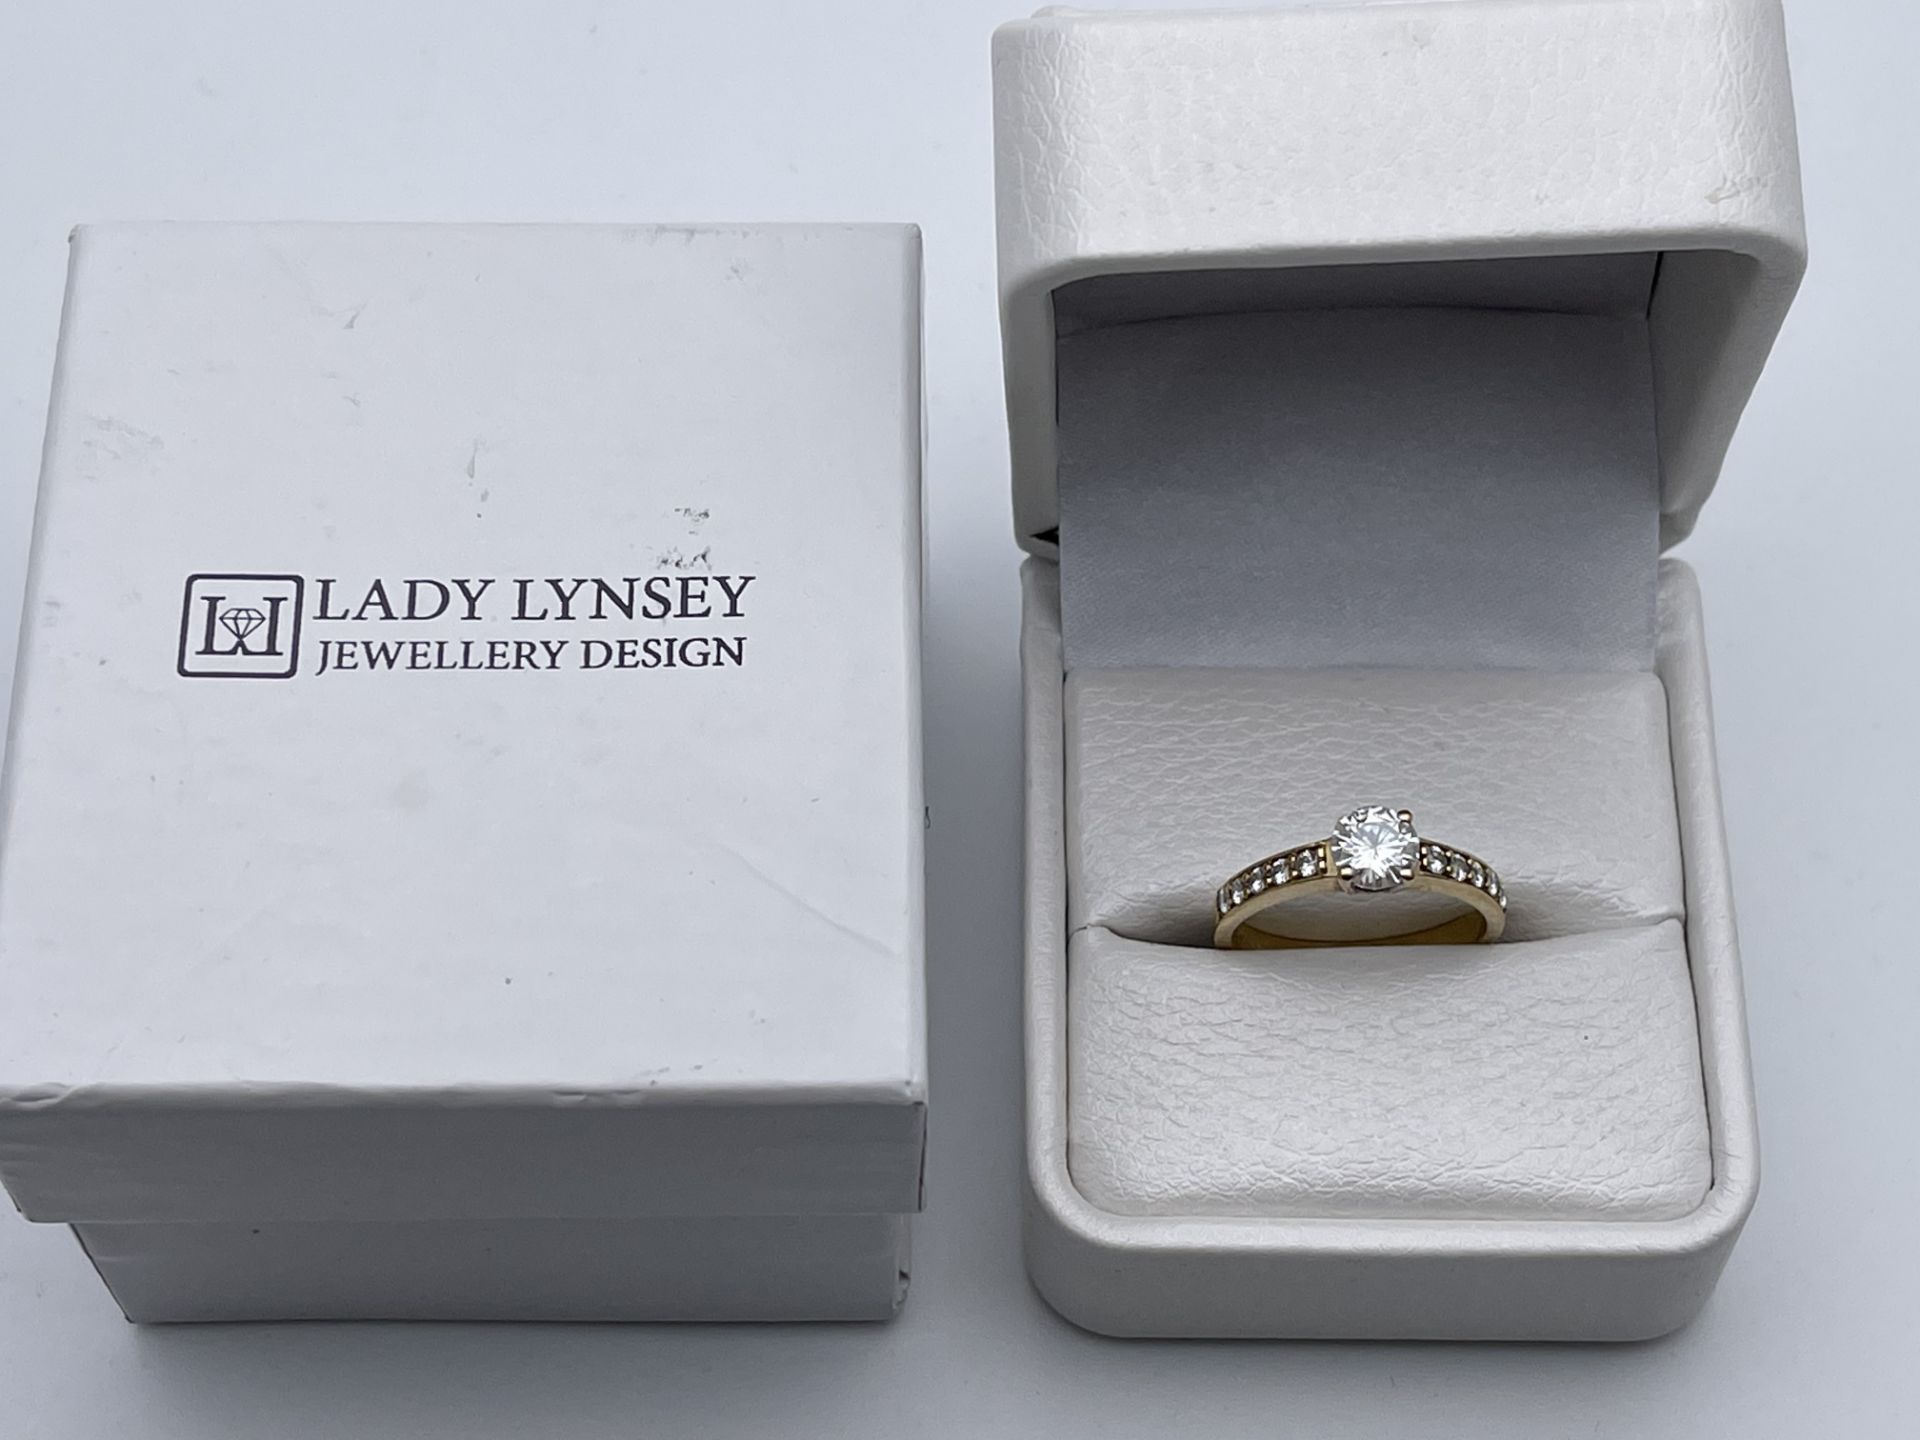 BOXED LADY LYNSEY JEWELLERY DESIGN, 9CT YELLOW GOLD SOLITAIRE RING, SET WITH STONES ON THE SHANK,